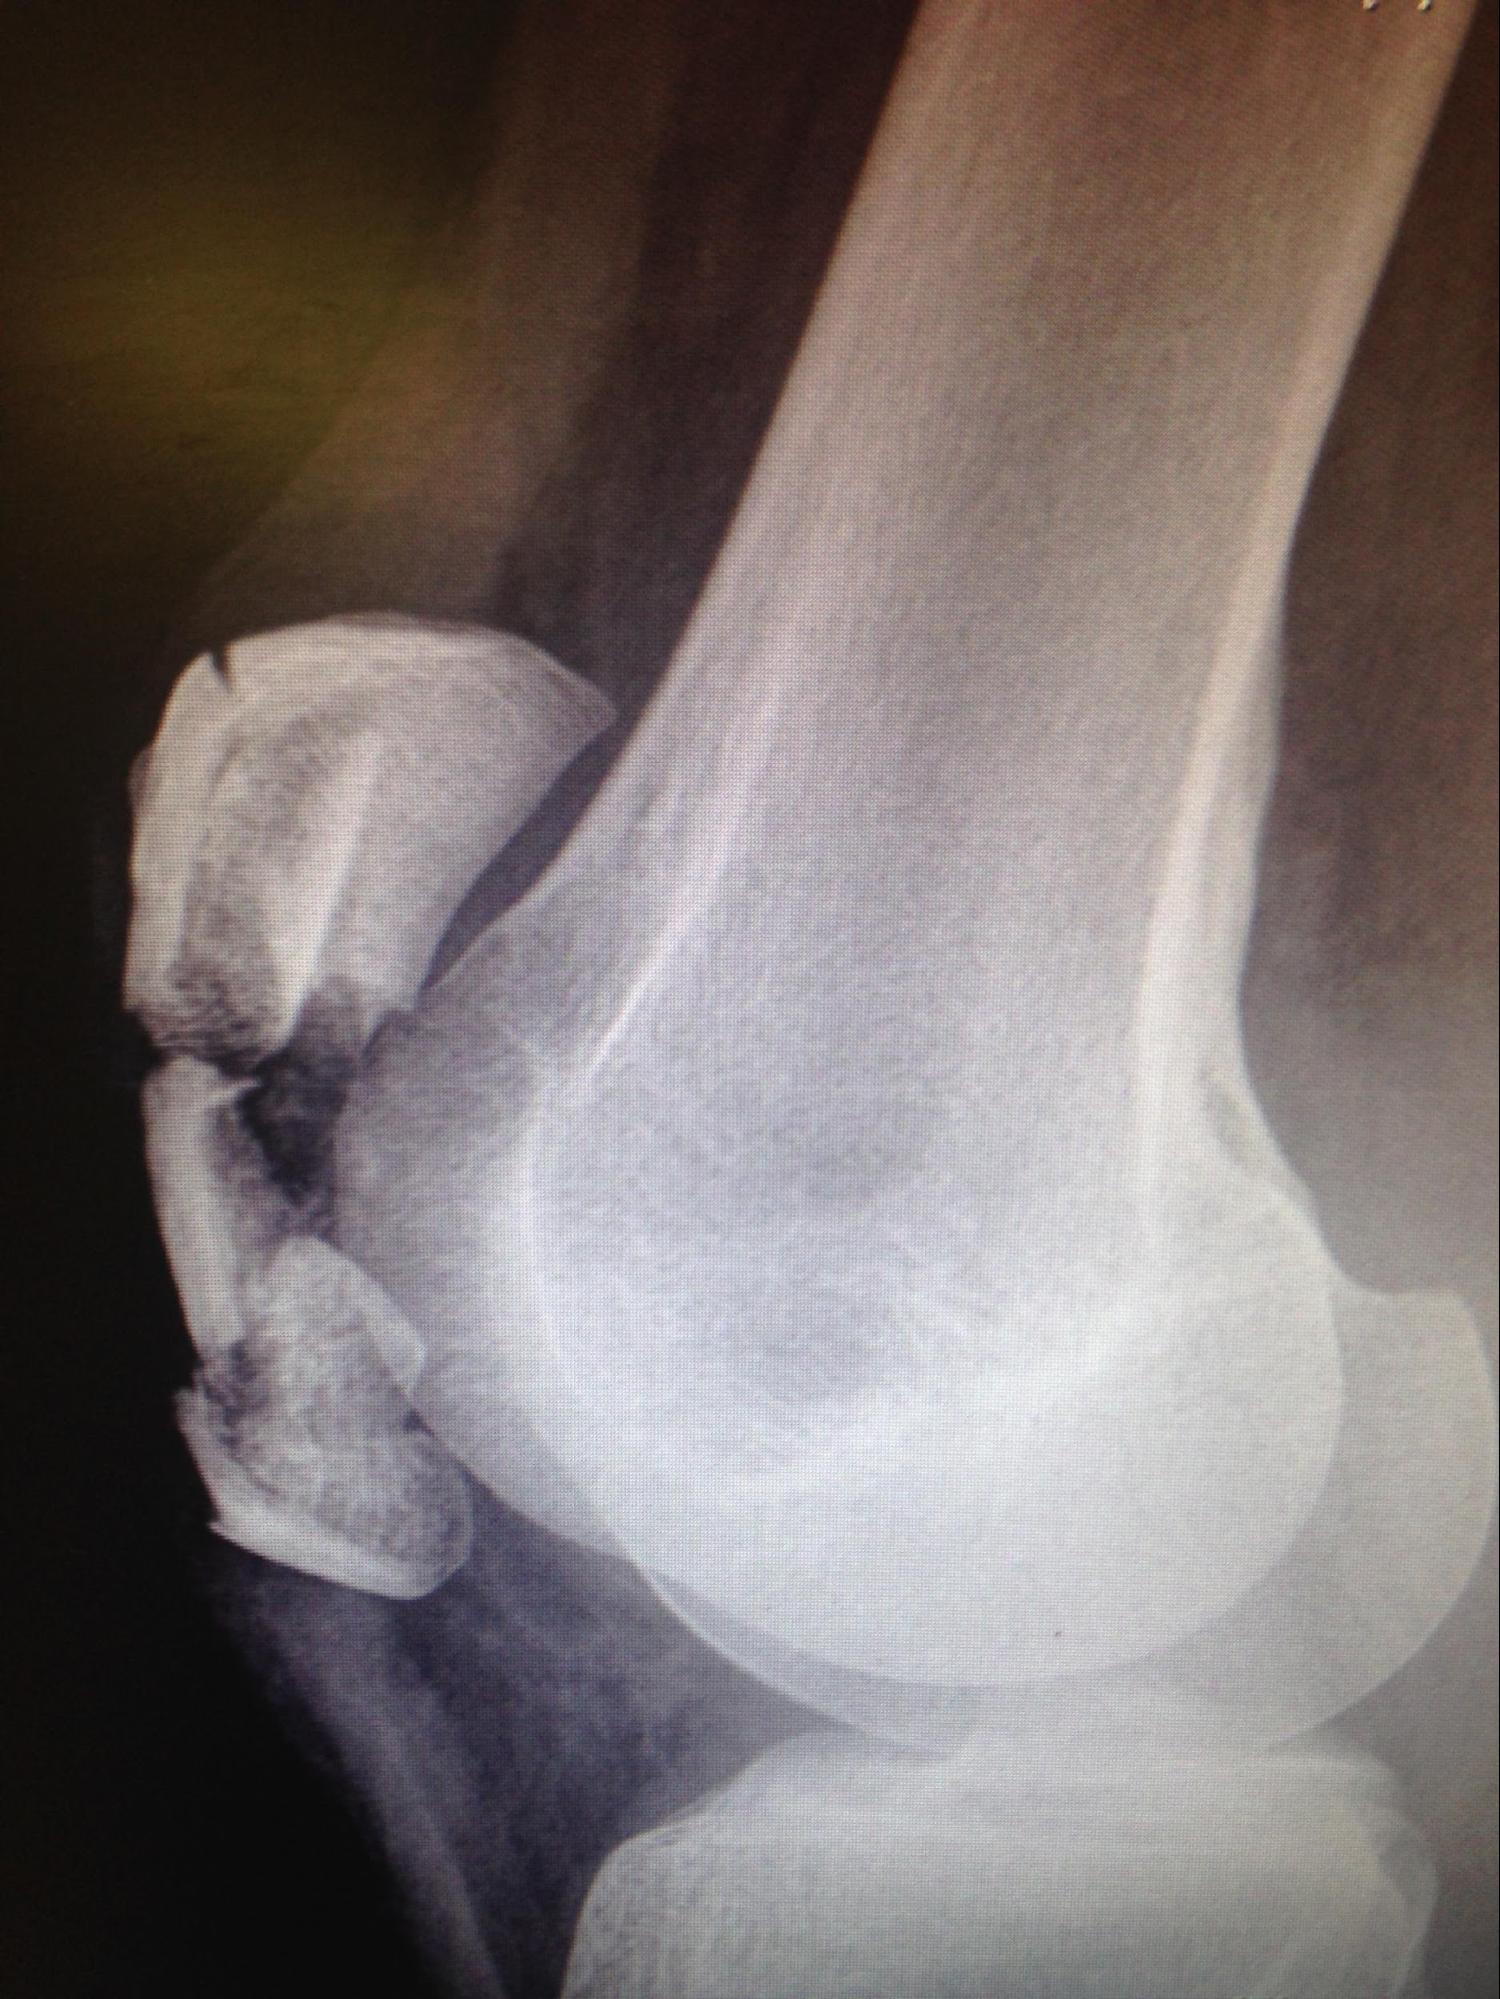 Patellar Fractures
Note the comminution and displacement. 